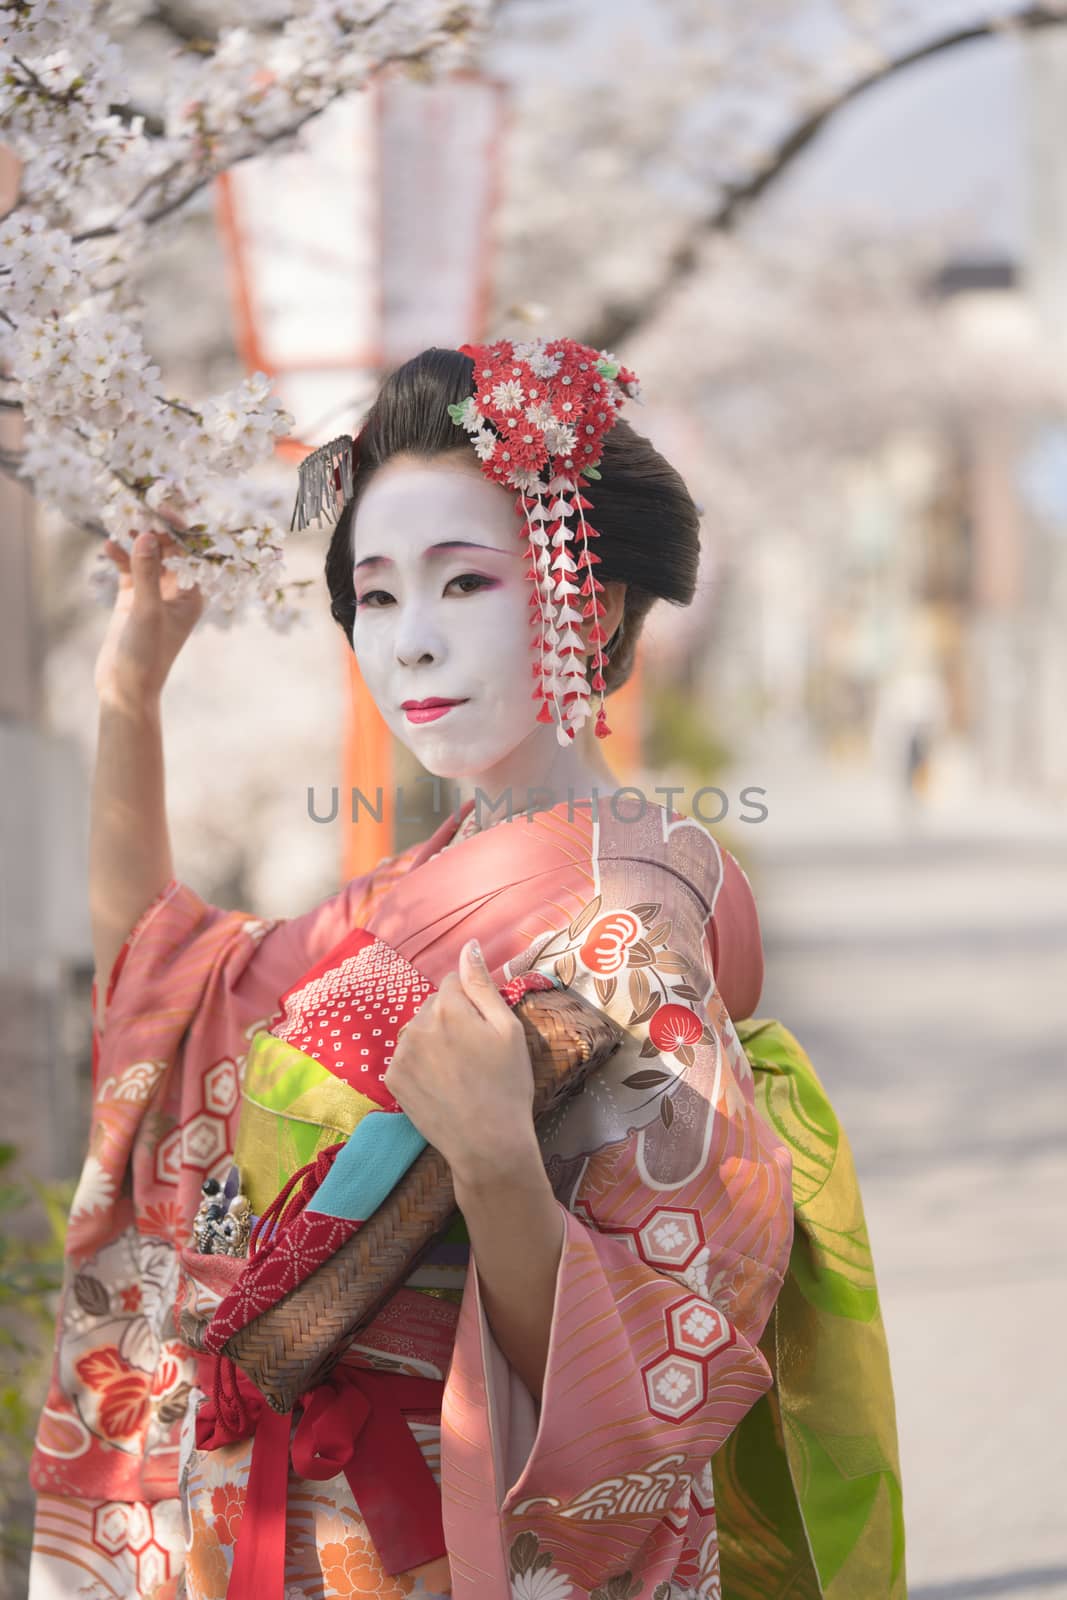 Maiko in kimono with kanzashi pins and holding a cherry branch by kuremo